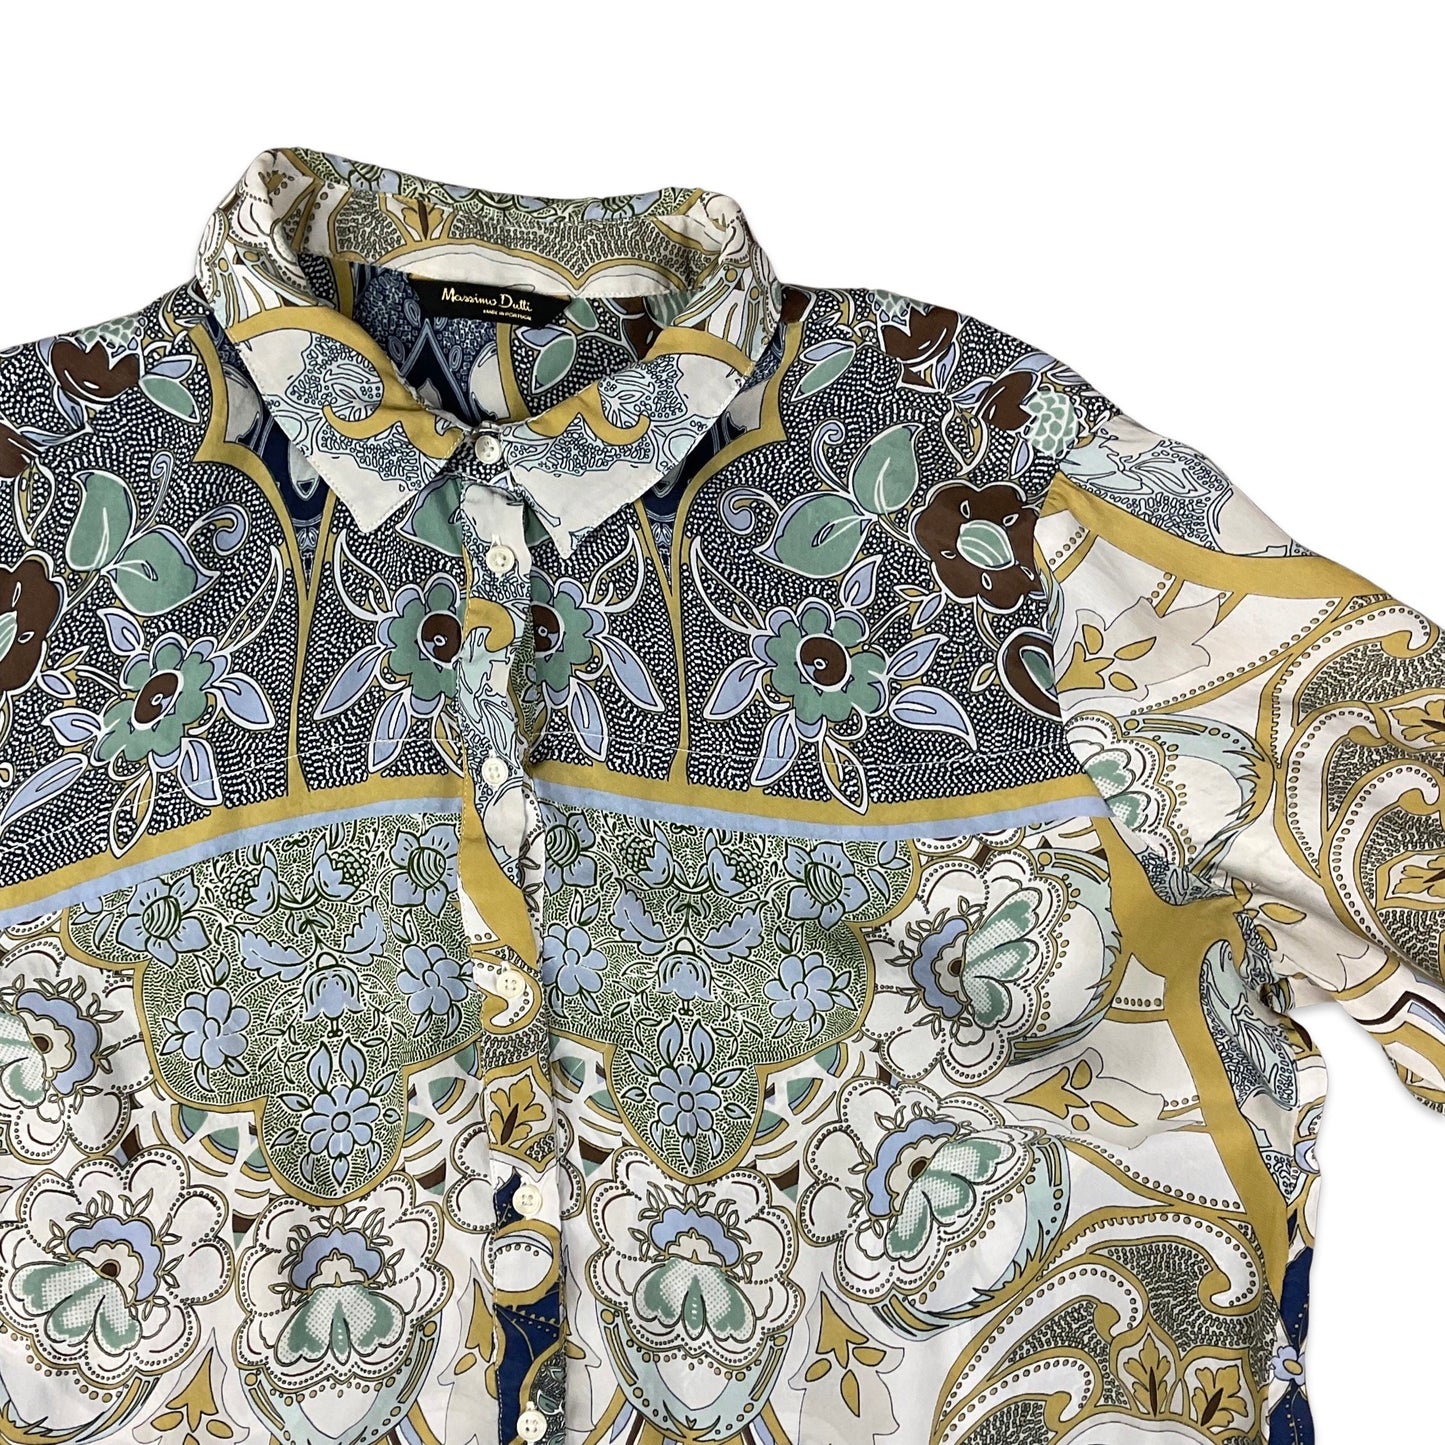 Vintage 90s Y2K Abstract Floral Print White, Teal, Blue, and Beige Shirt Blouse 14 16